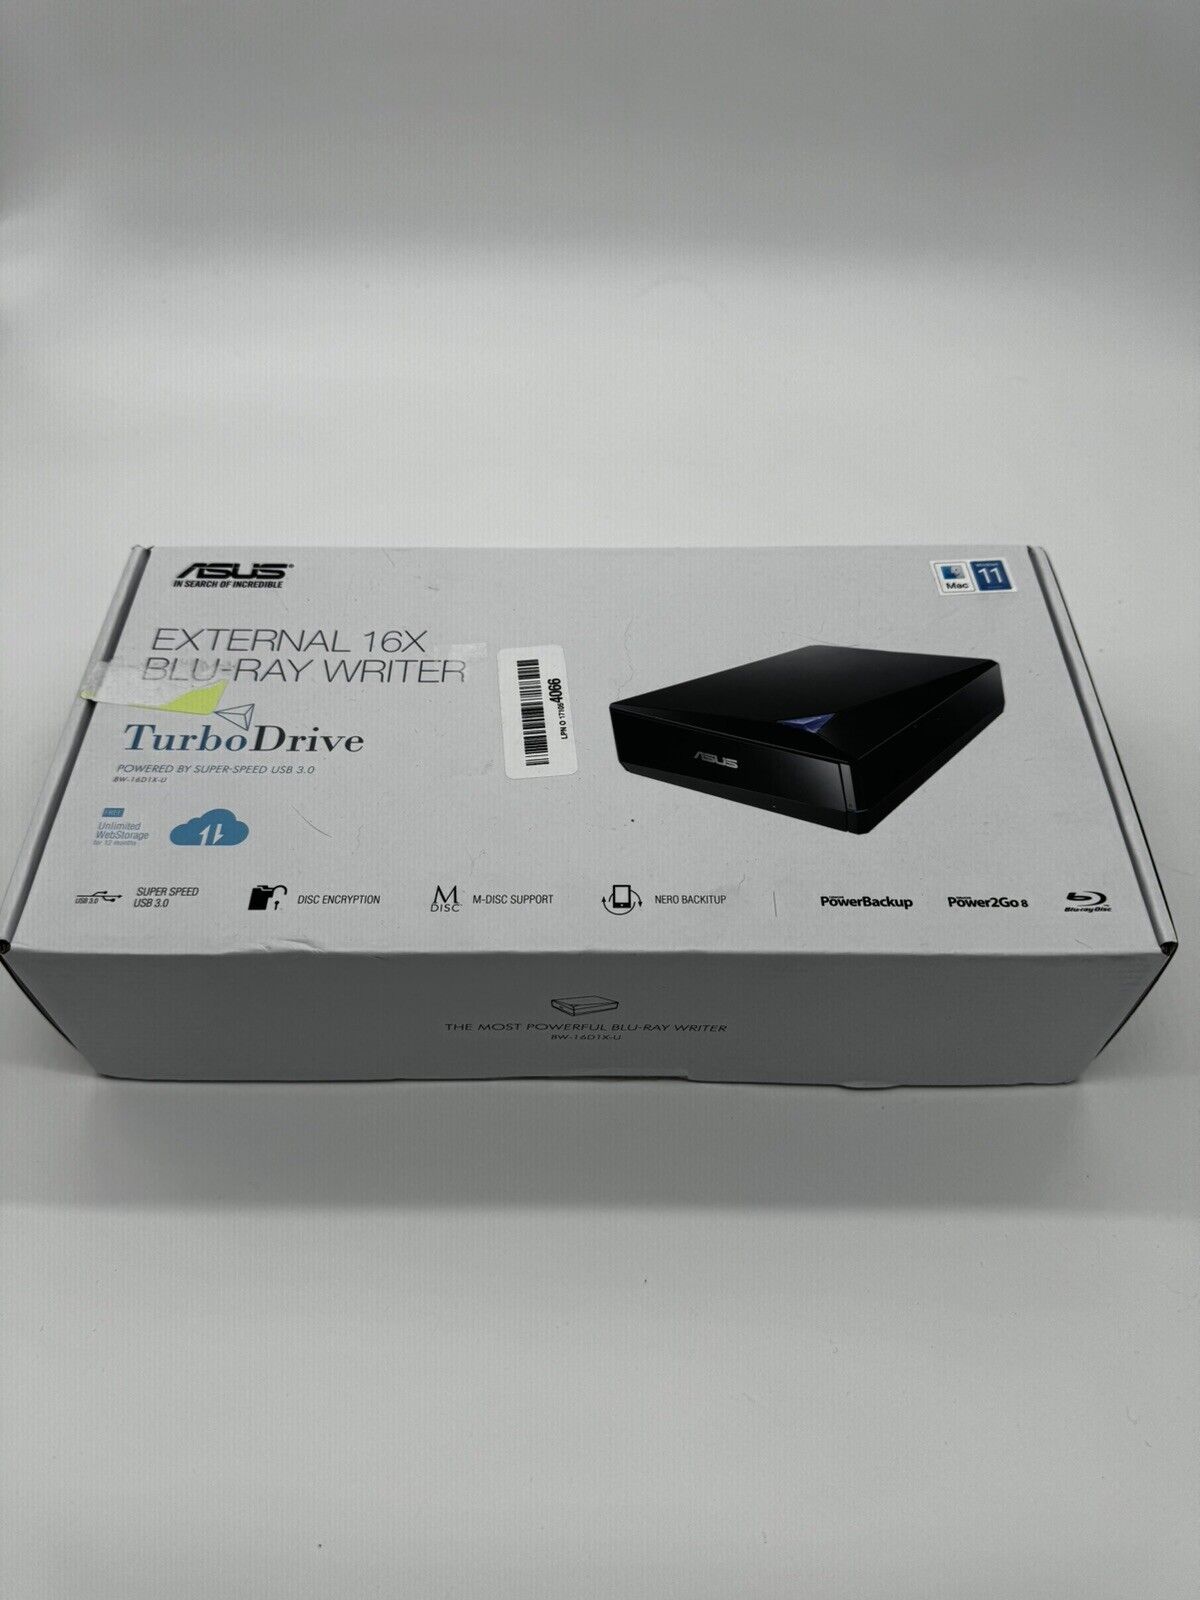 ASUS BW-16D1X-U External 16x Blu-Ray Burner Drive for PC- Unknown Condition Read